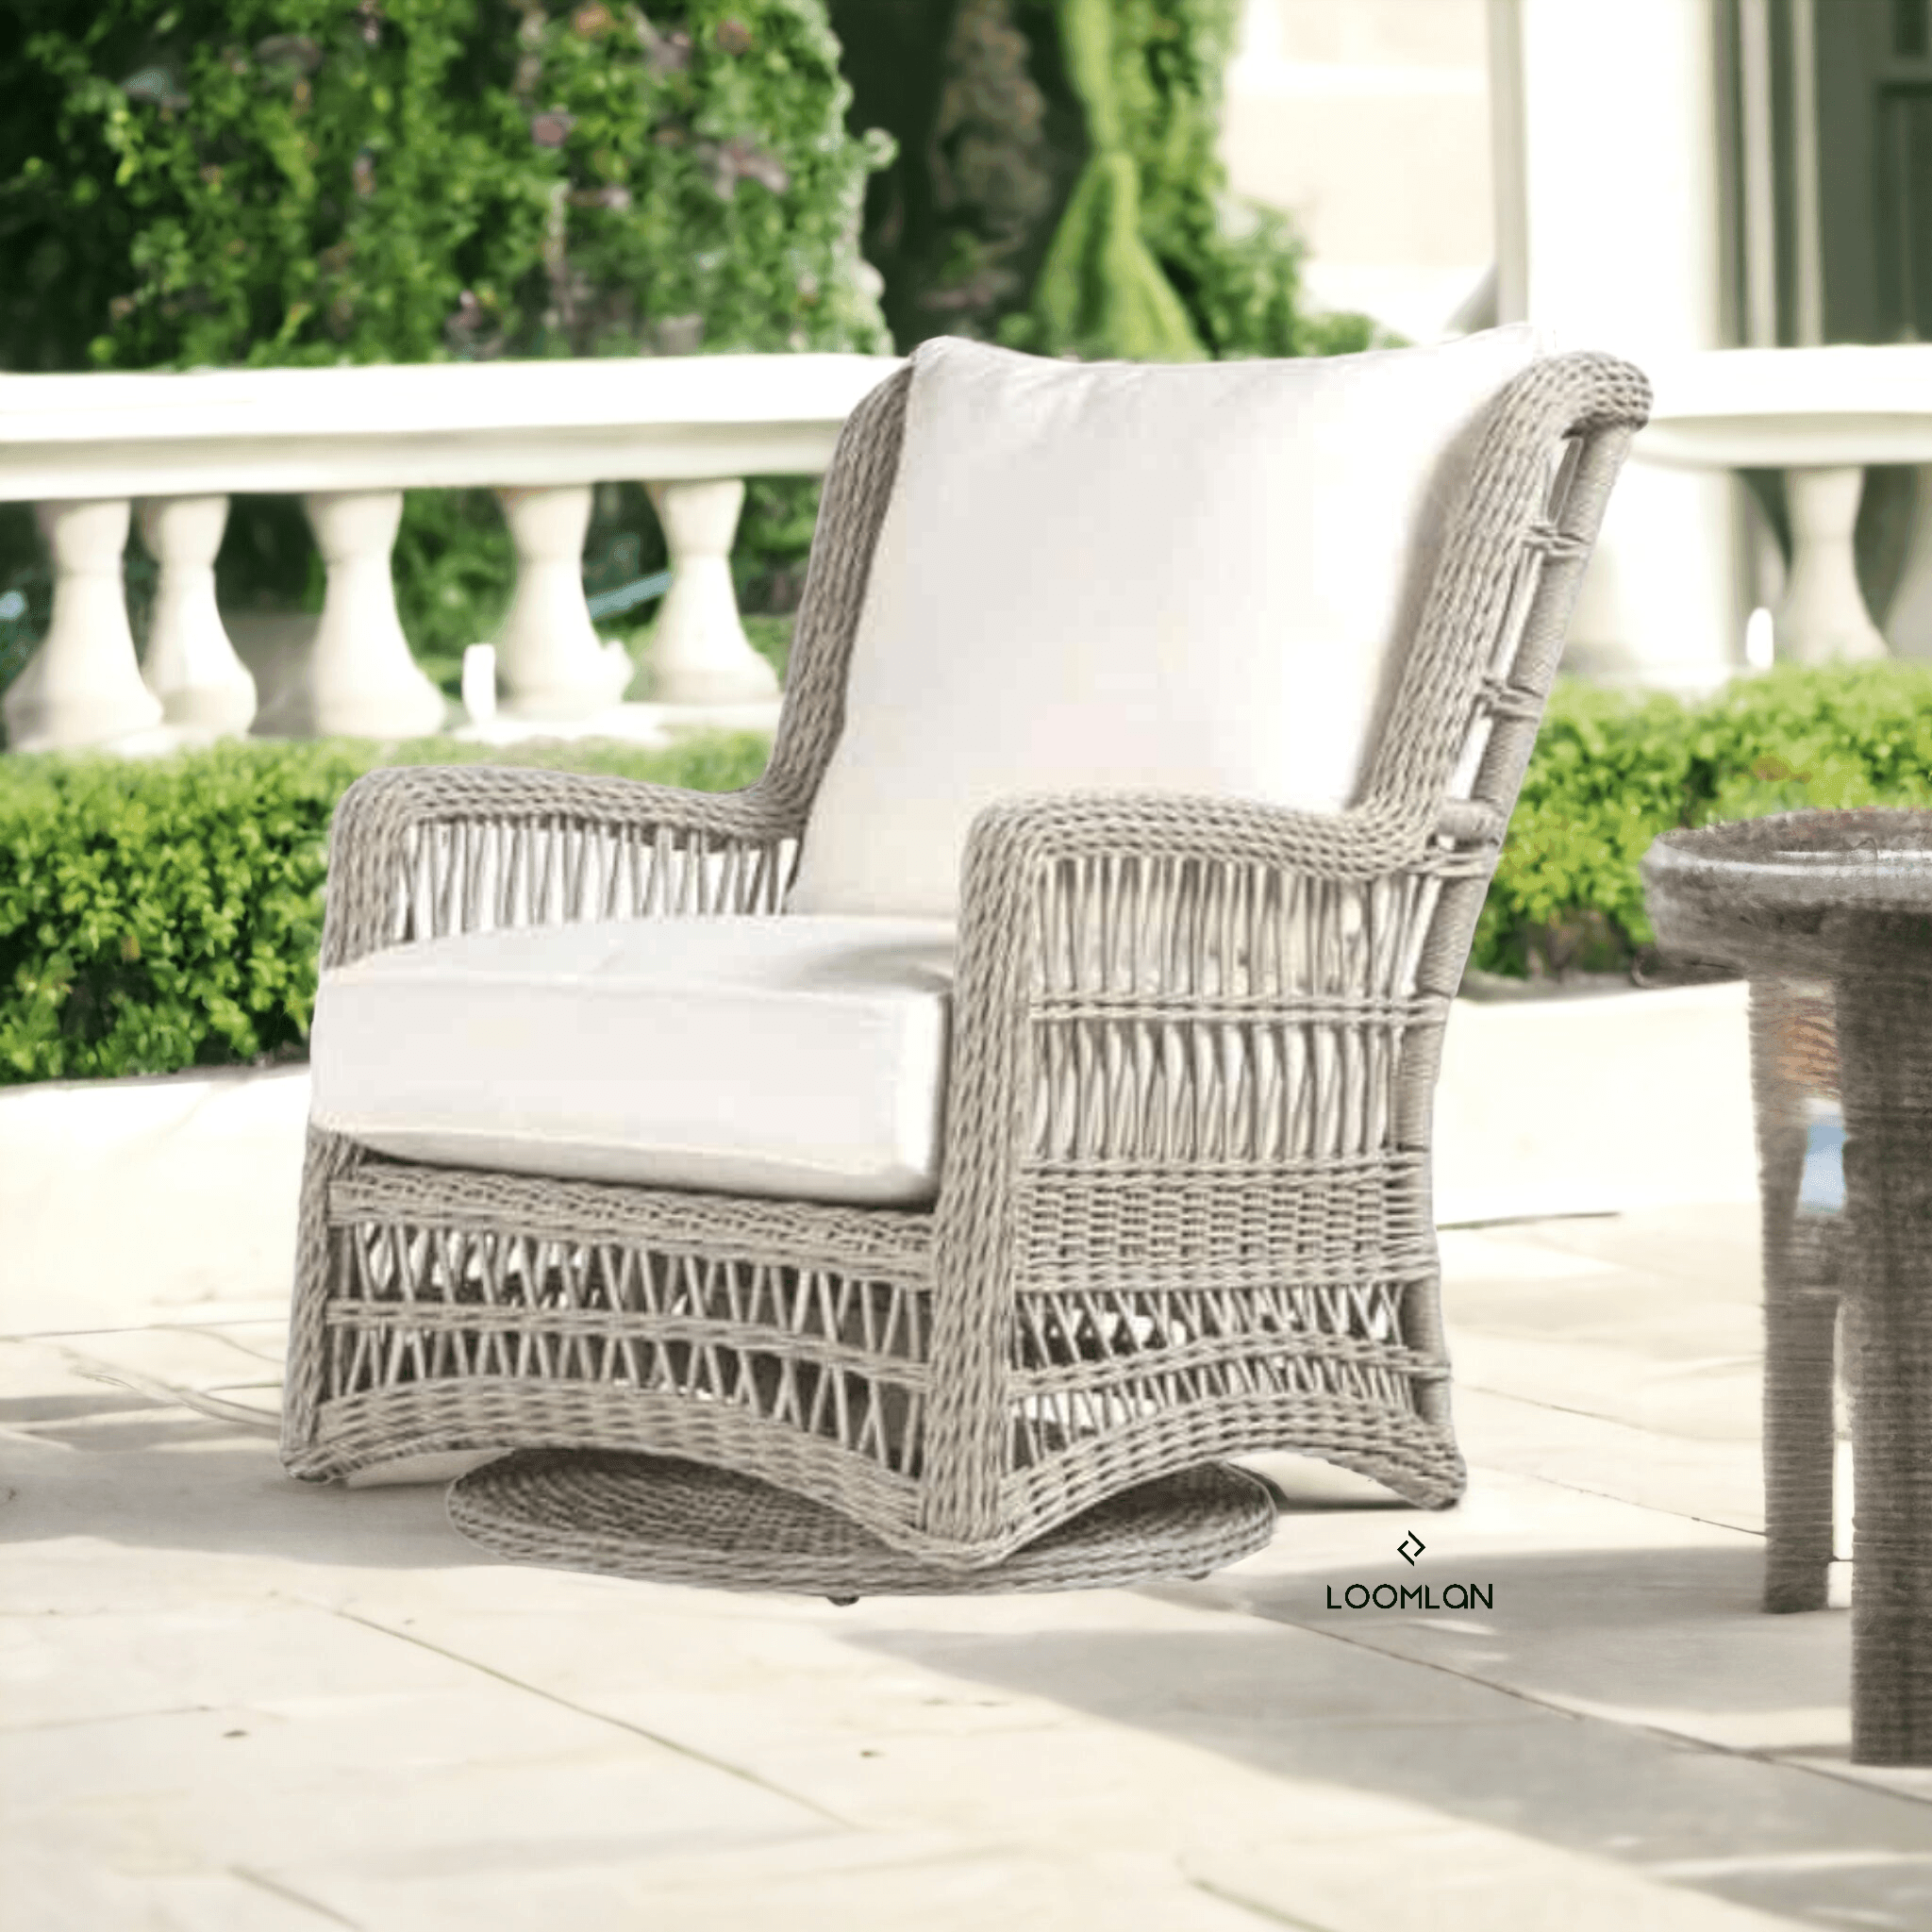 LOOMLAN Outdoor - Mackinac Wicker Outdoor Swivel Glider Lounge Chair - High Back - Outdoor Lounge Chairs